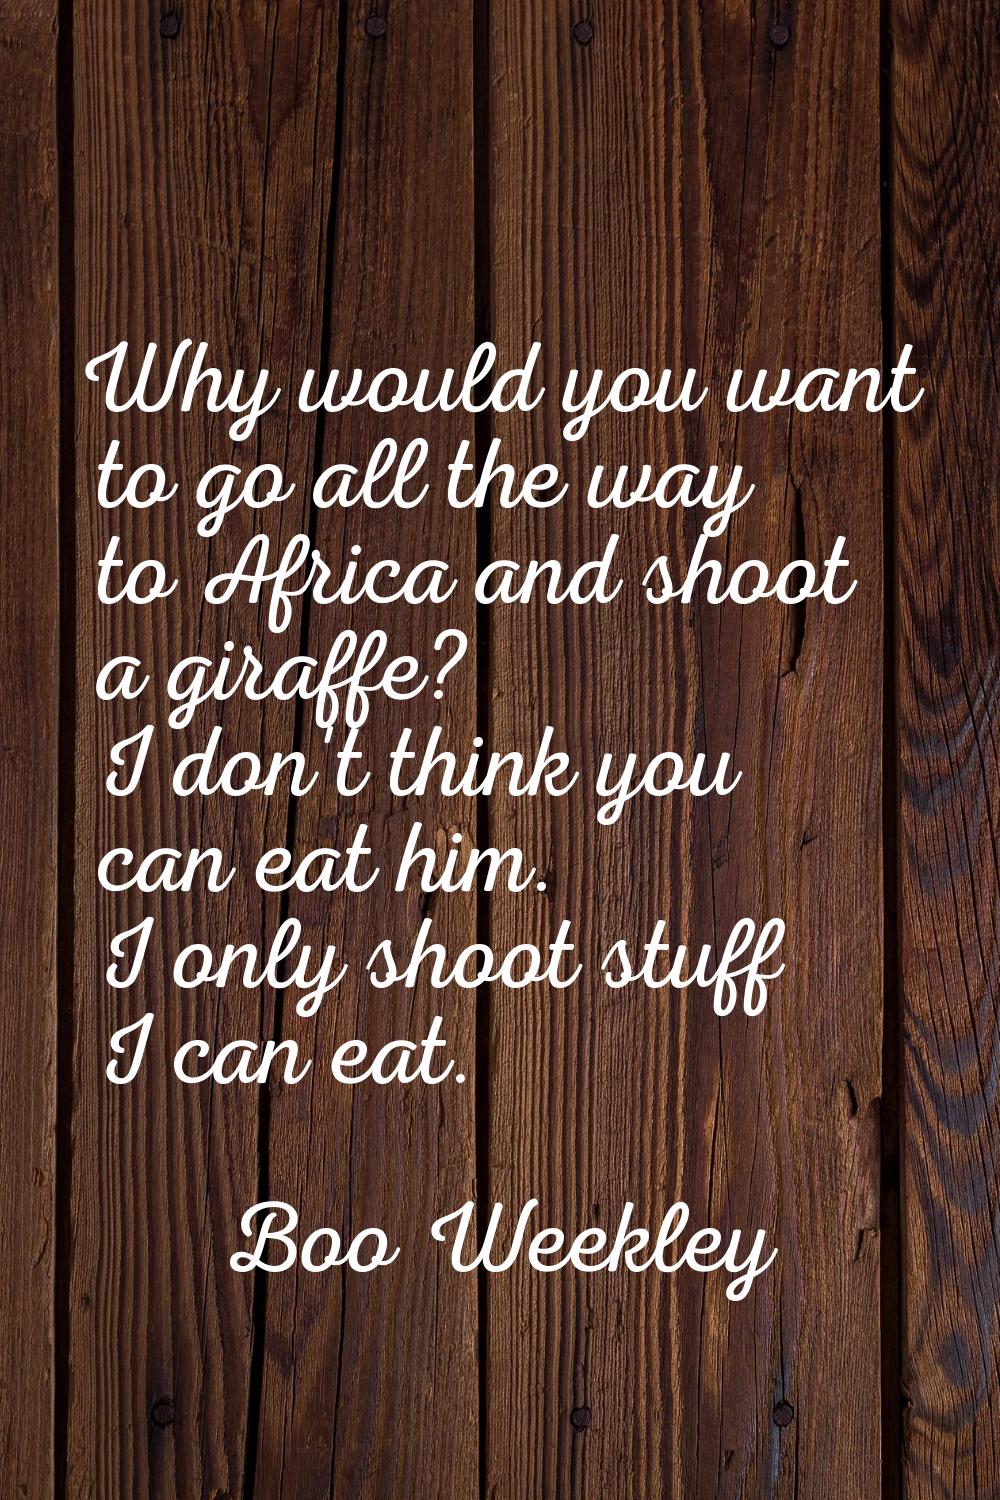 Why would you want to go all the way to Africa and shoot a giraffe? I don't think you can eat him. 